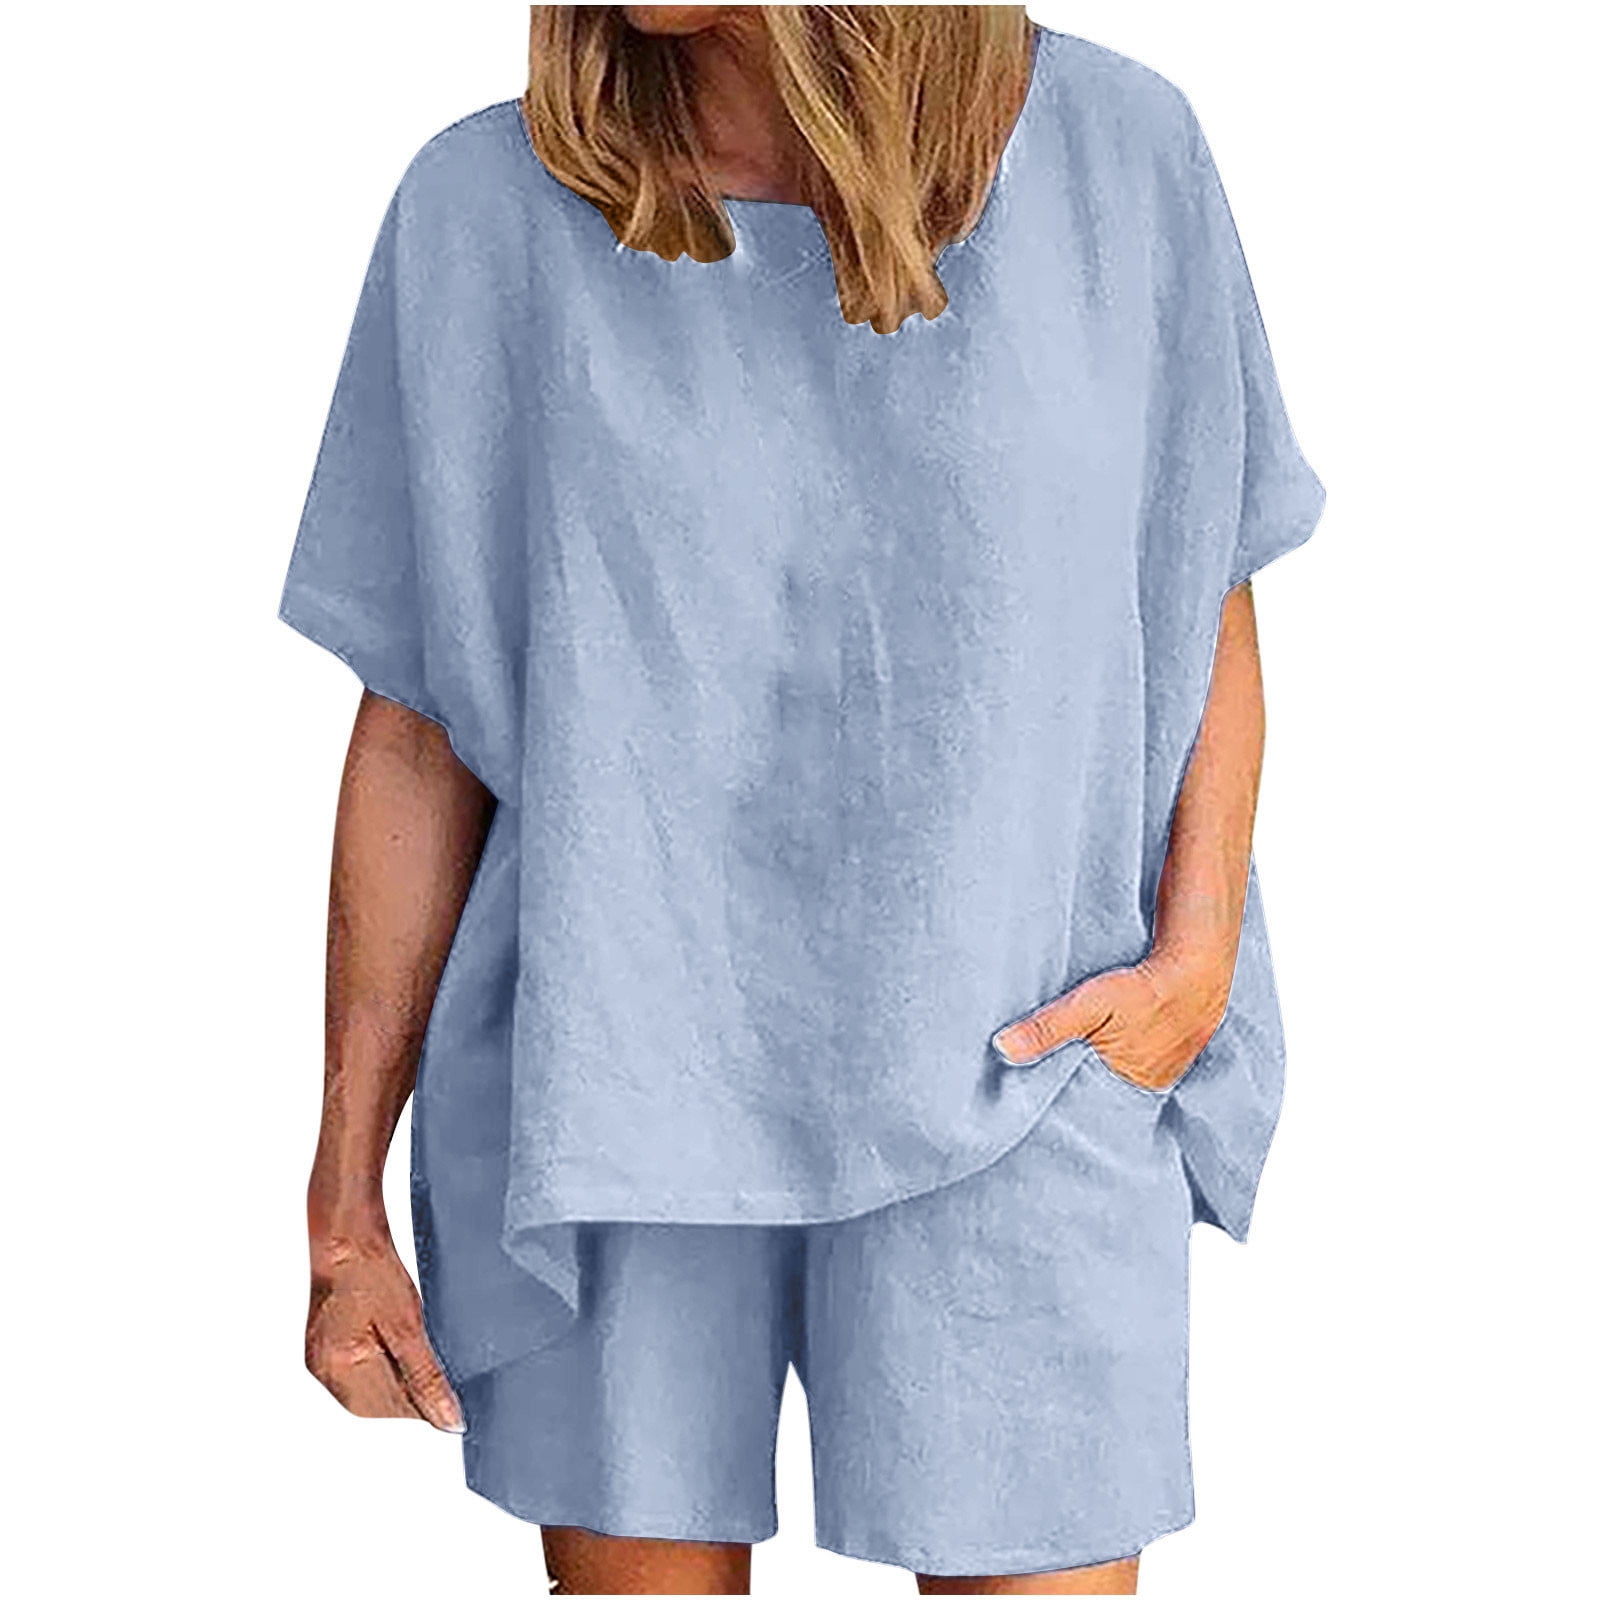 REORIAFEE Honeymoon Outfits for Women Beach Vacation Outfits Women Casual  Summer Round Neck Short Sleeve Tops Shorts Two Pieces Set Suit Light Blue XL